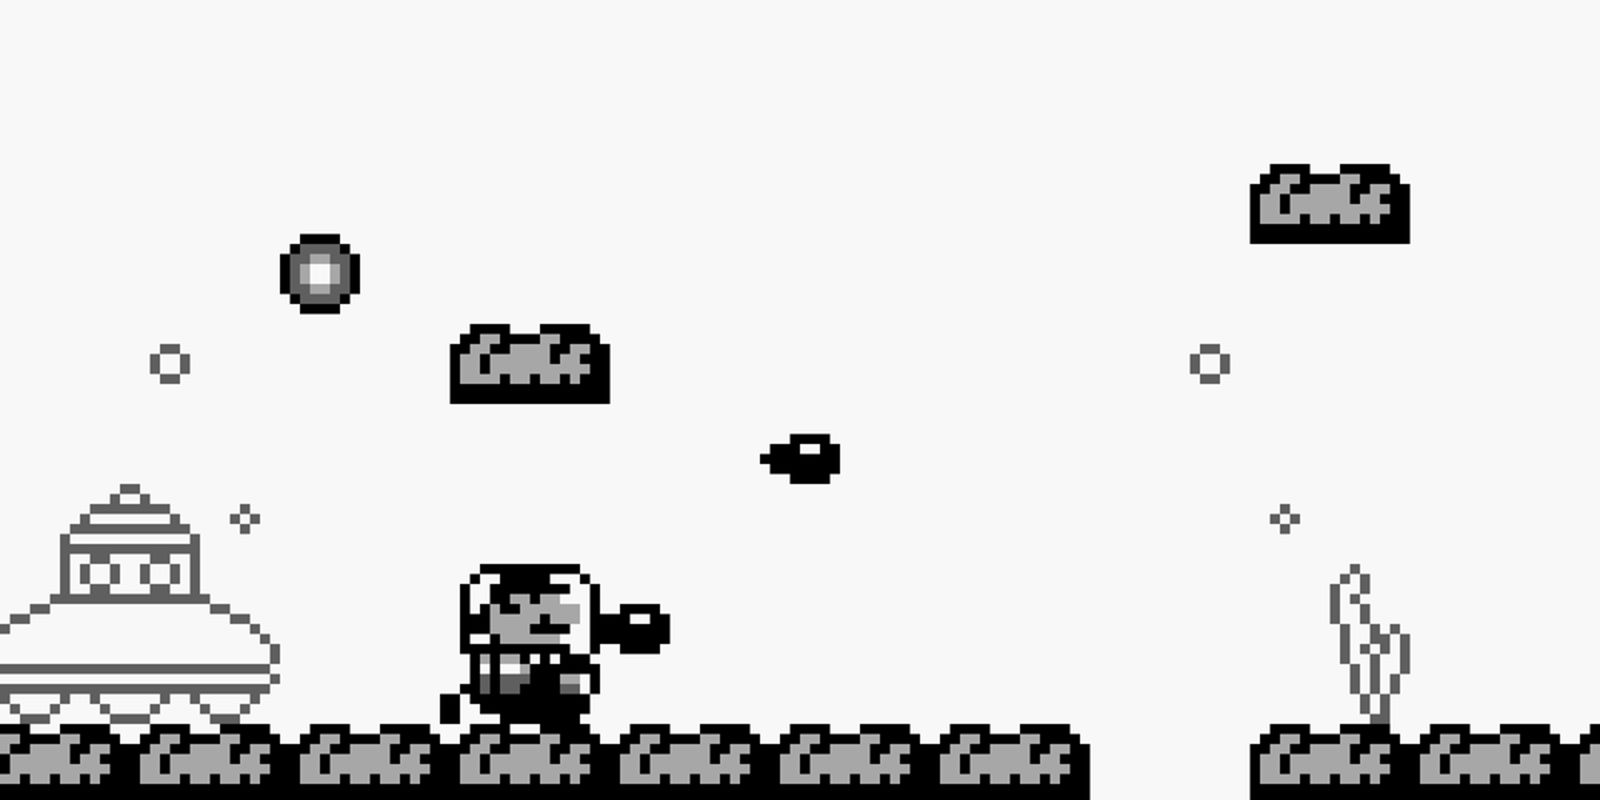 Super Mario Land gameplay with Mario in a space rover